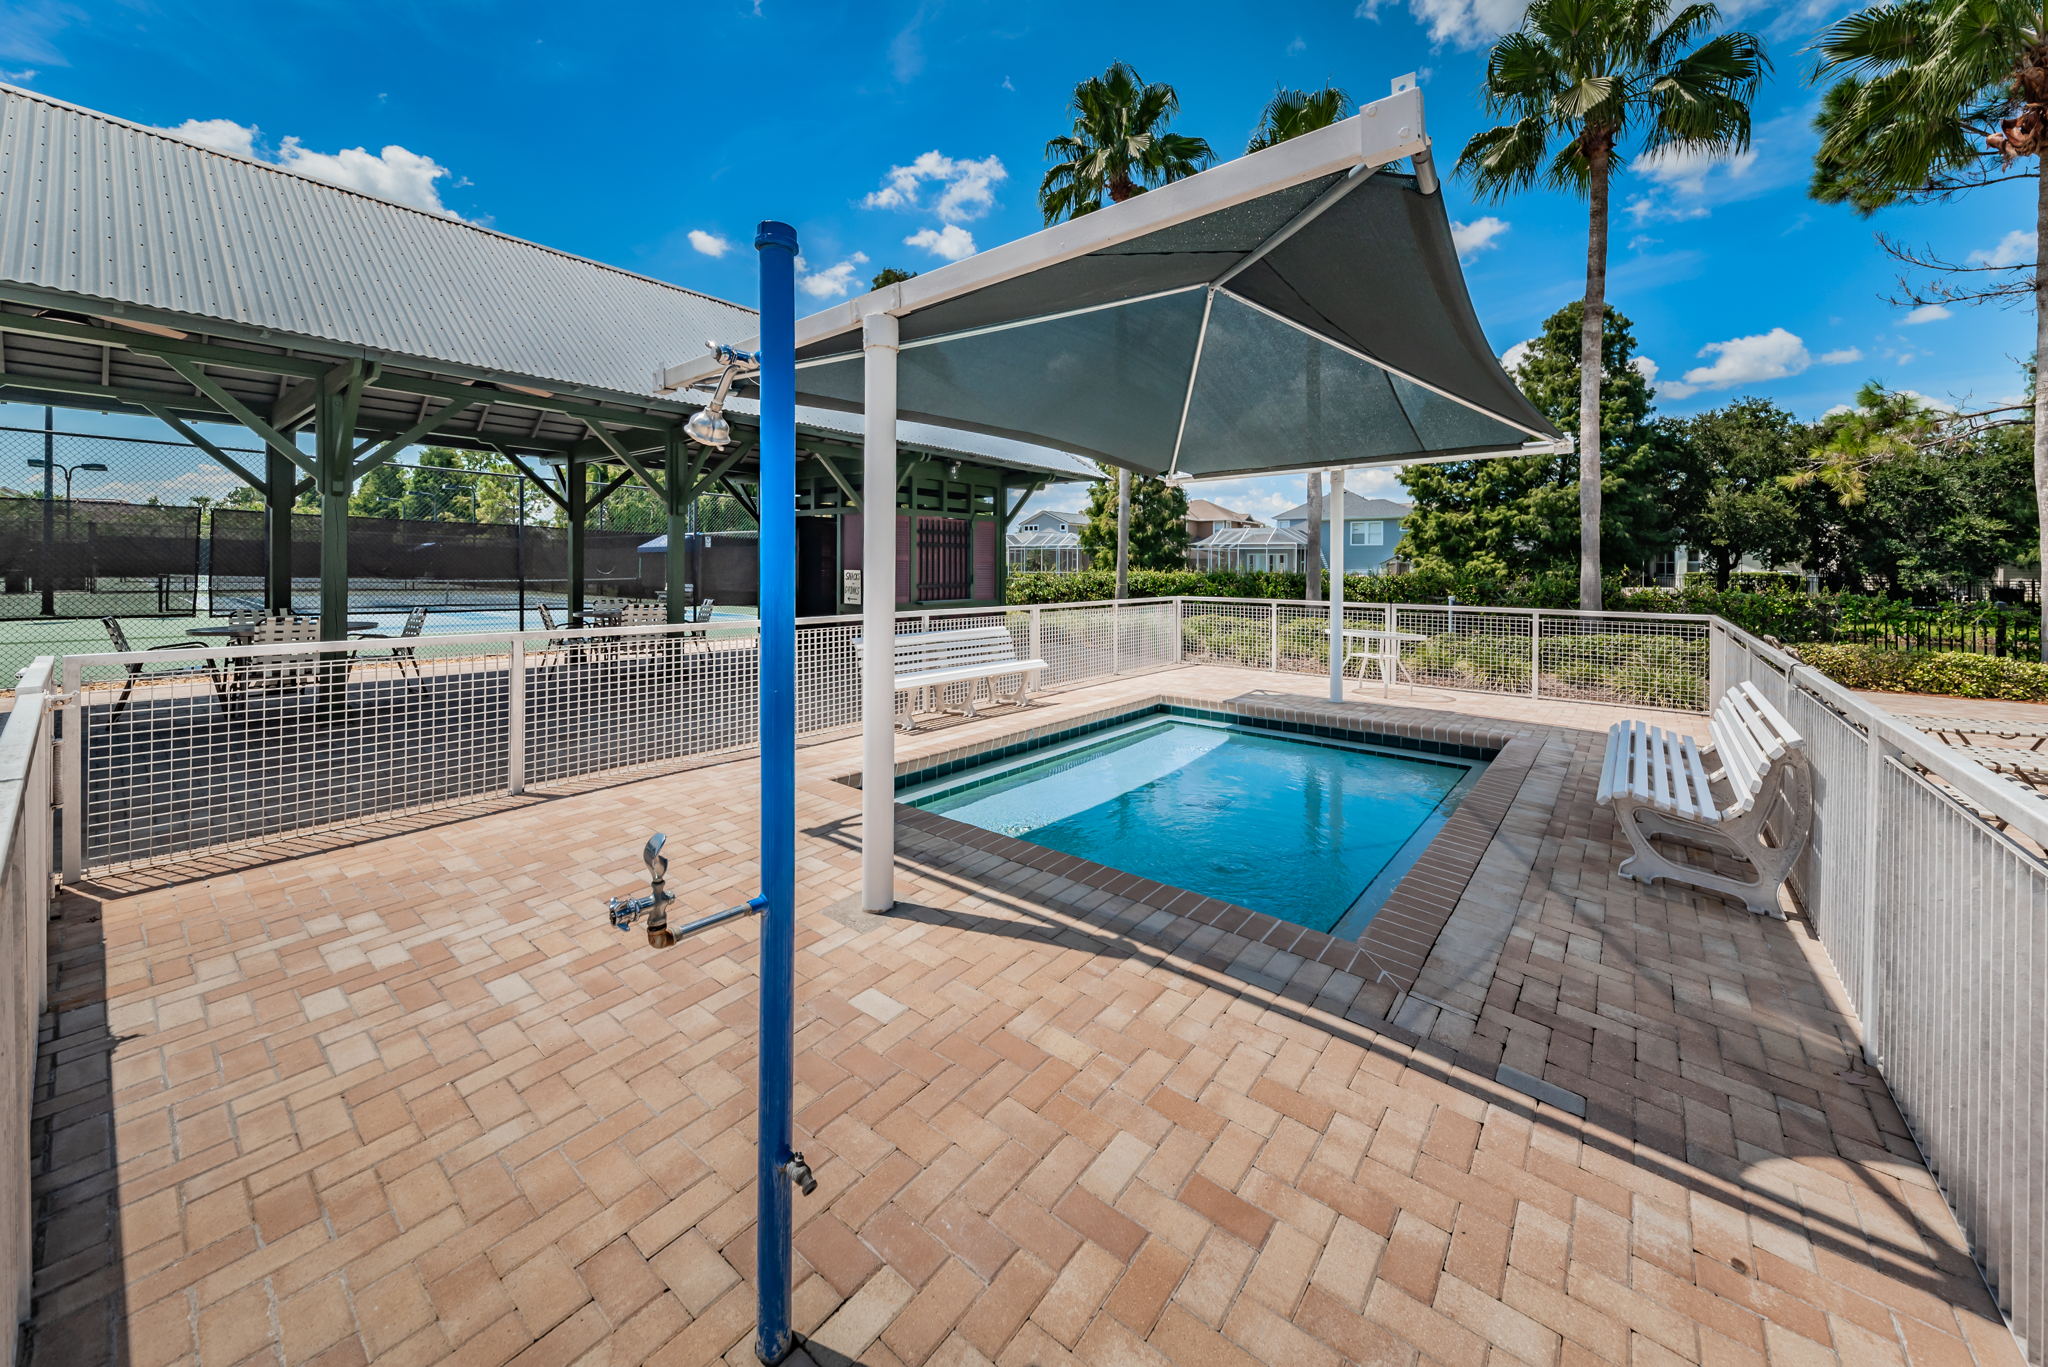 Westchase Community Association Pool and Tennis15